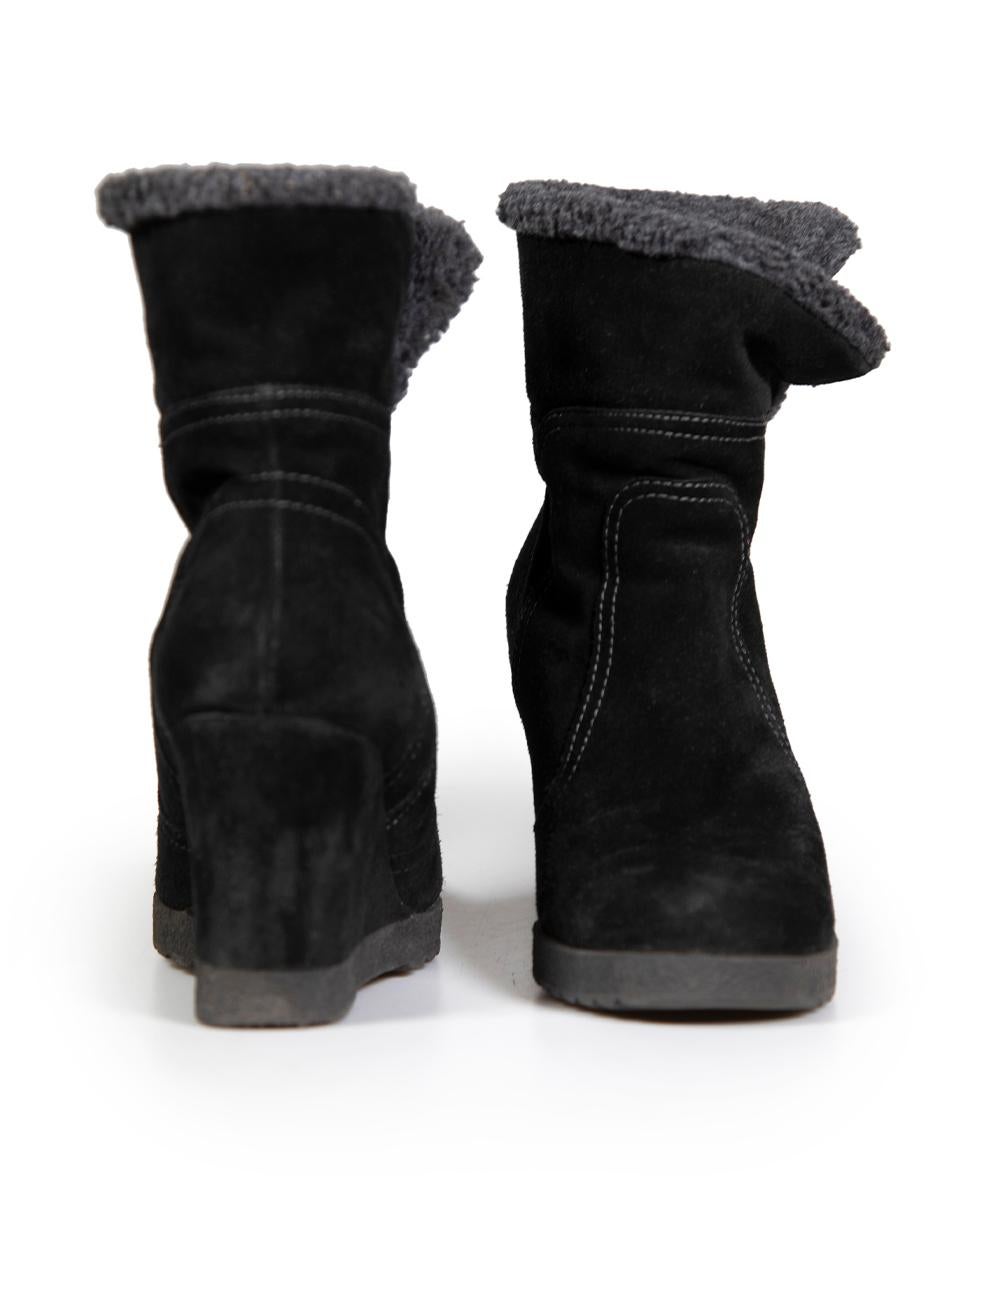 Aquatalia Black Suede Shearling Lined Wedge Boots Size IT 39 In Good Condition For Sale In London, GB